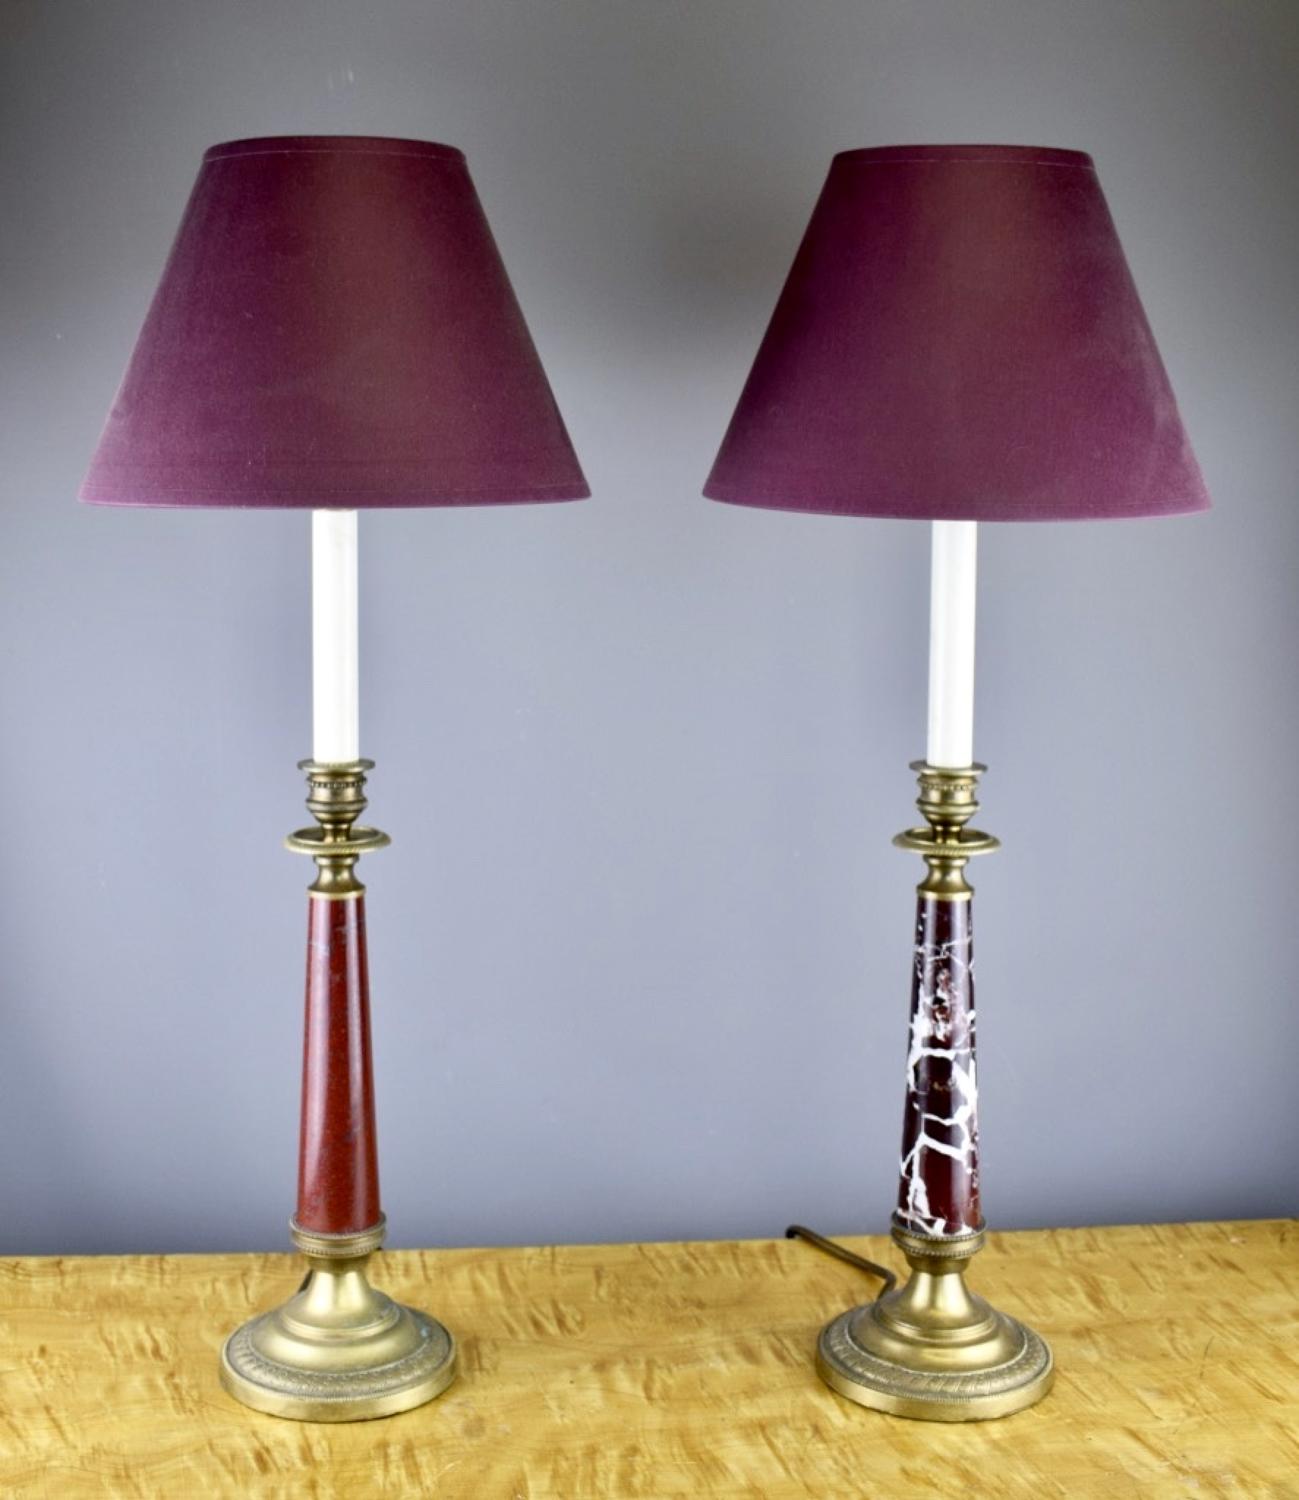 Pair of Gilt Brass & Marble Candlestick Lamps in Empire Style